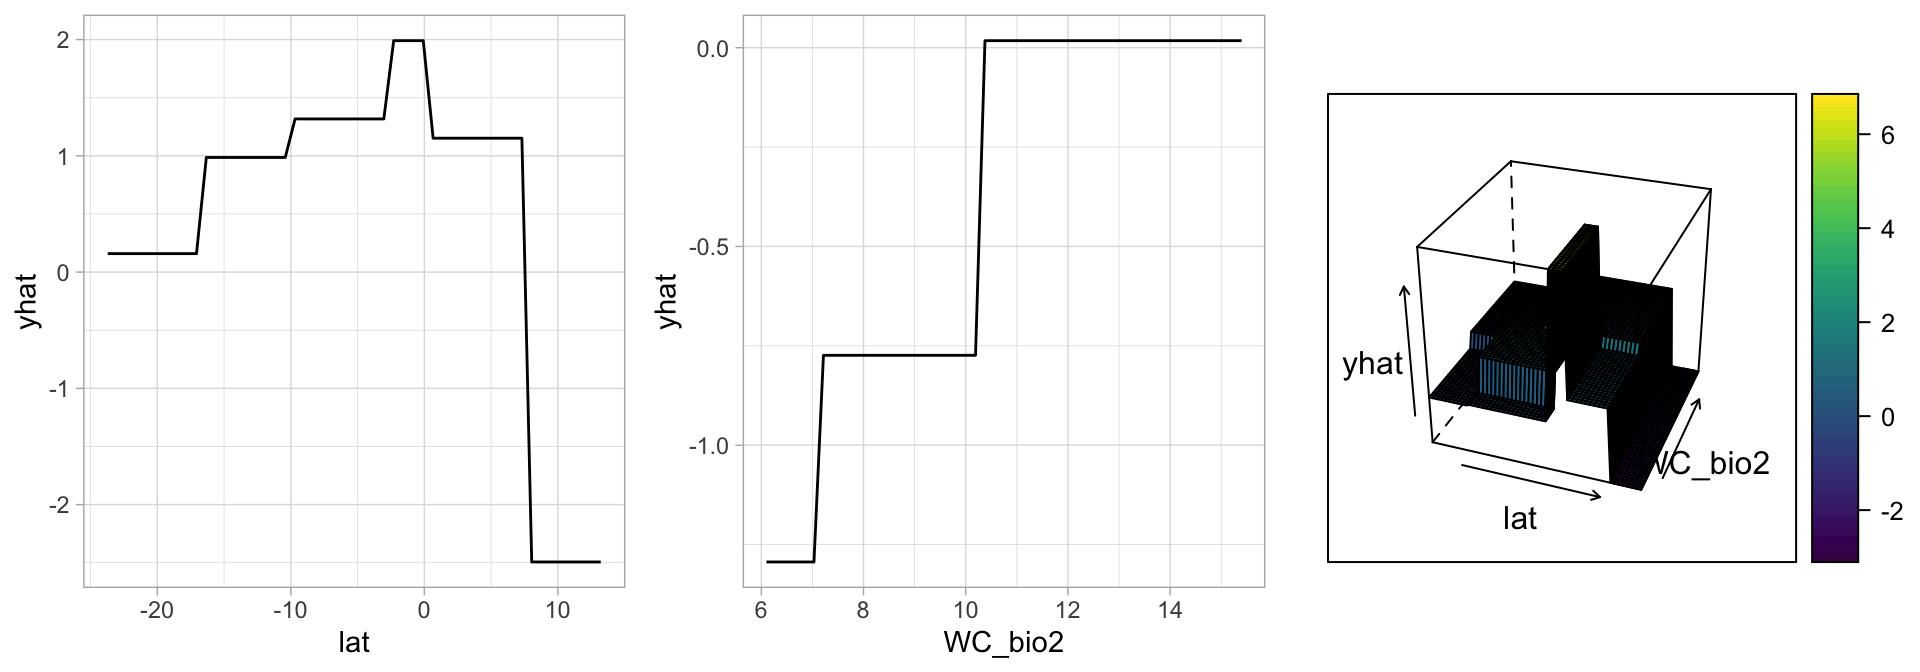 Partial dependence plots to understand the relationship between lat, WC_bio2 and present.